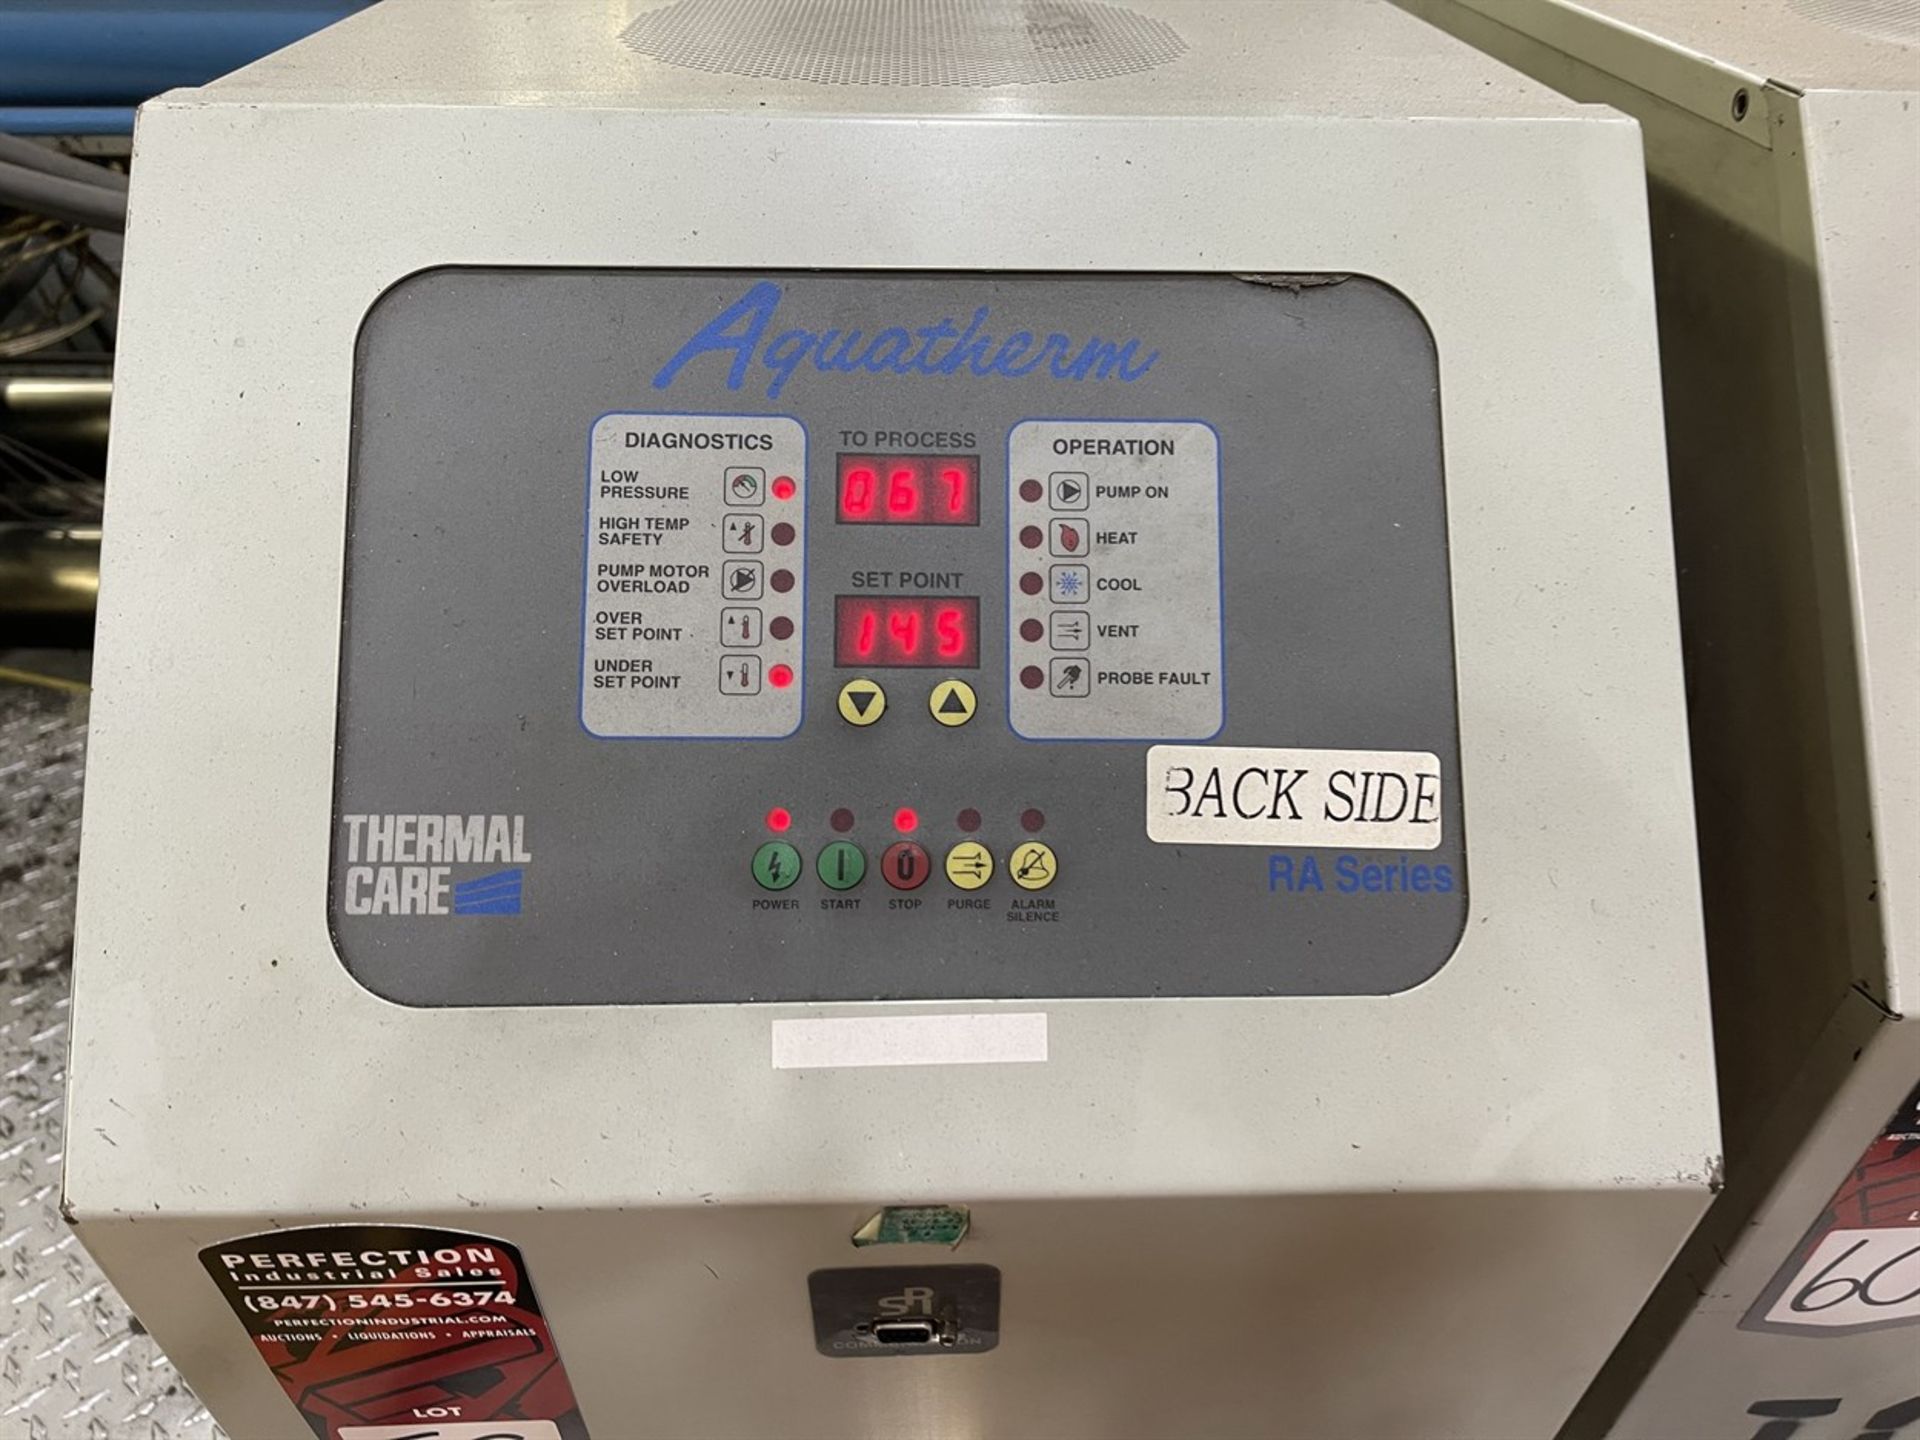 THERMAL CARE Aquatherm RA091004 Temperature Controller, s/n 20120049901 - Image 2 of 3